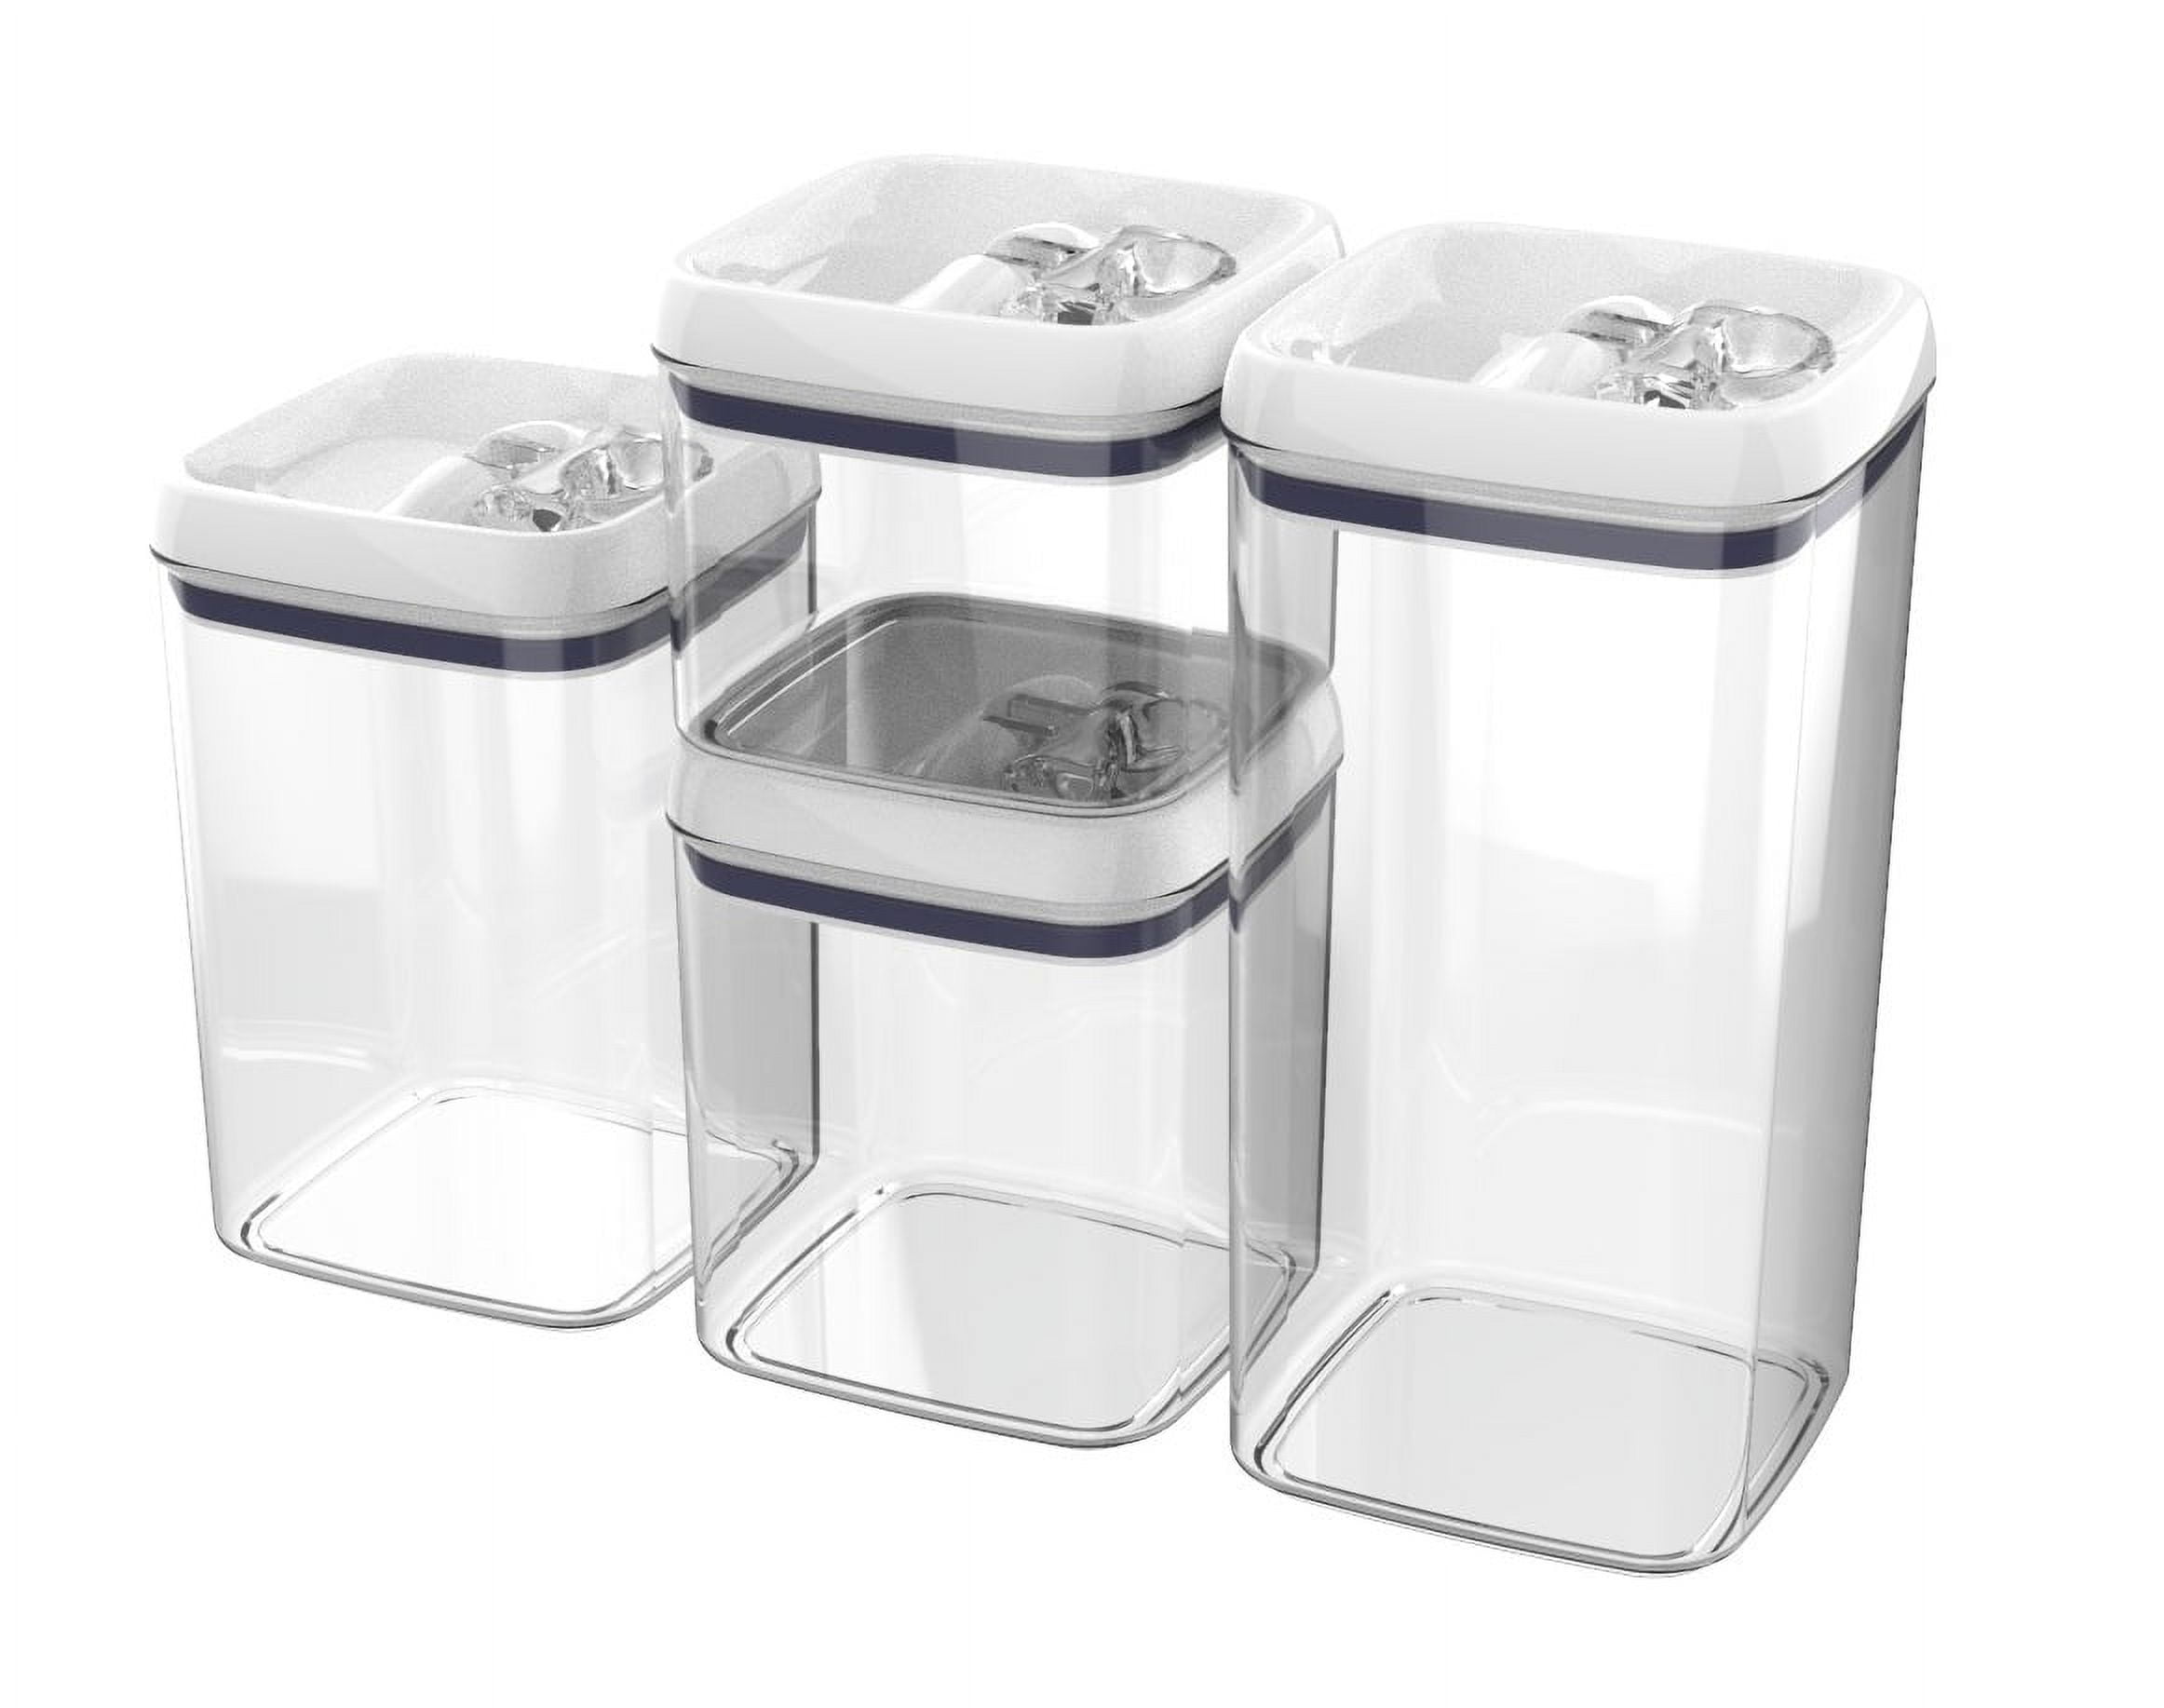 Oxo Pop 5pc Plastic Airtight Food Storage Container Set White : Target